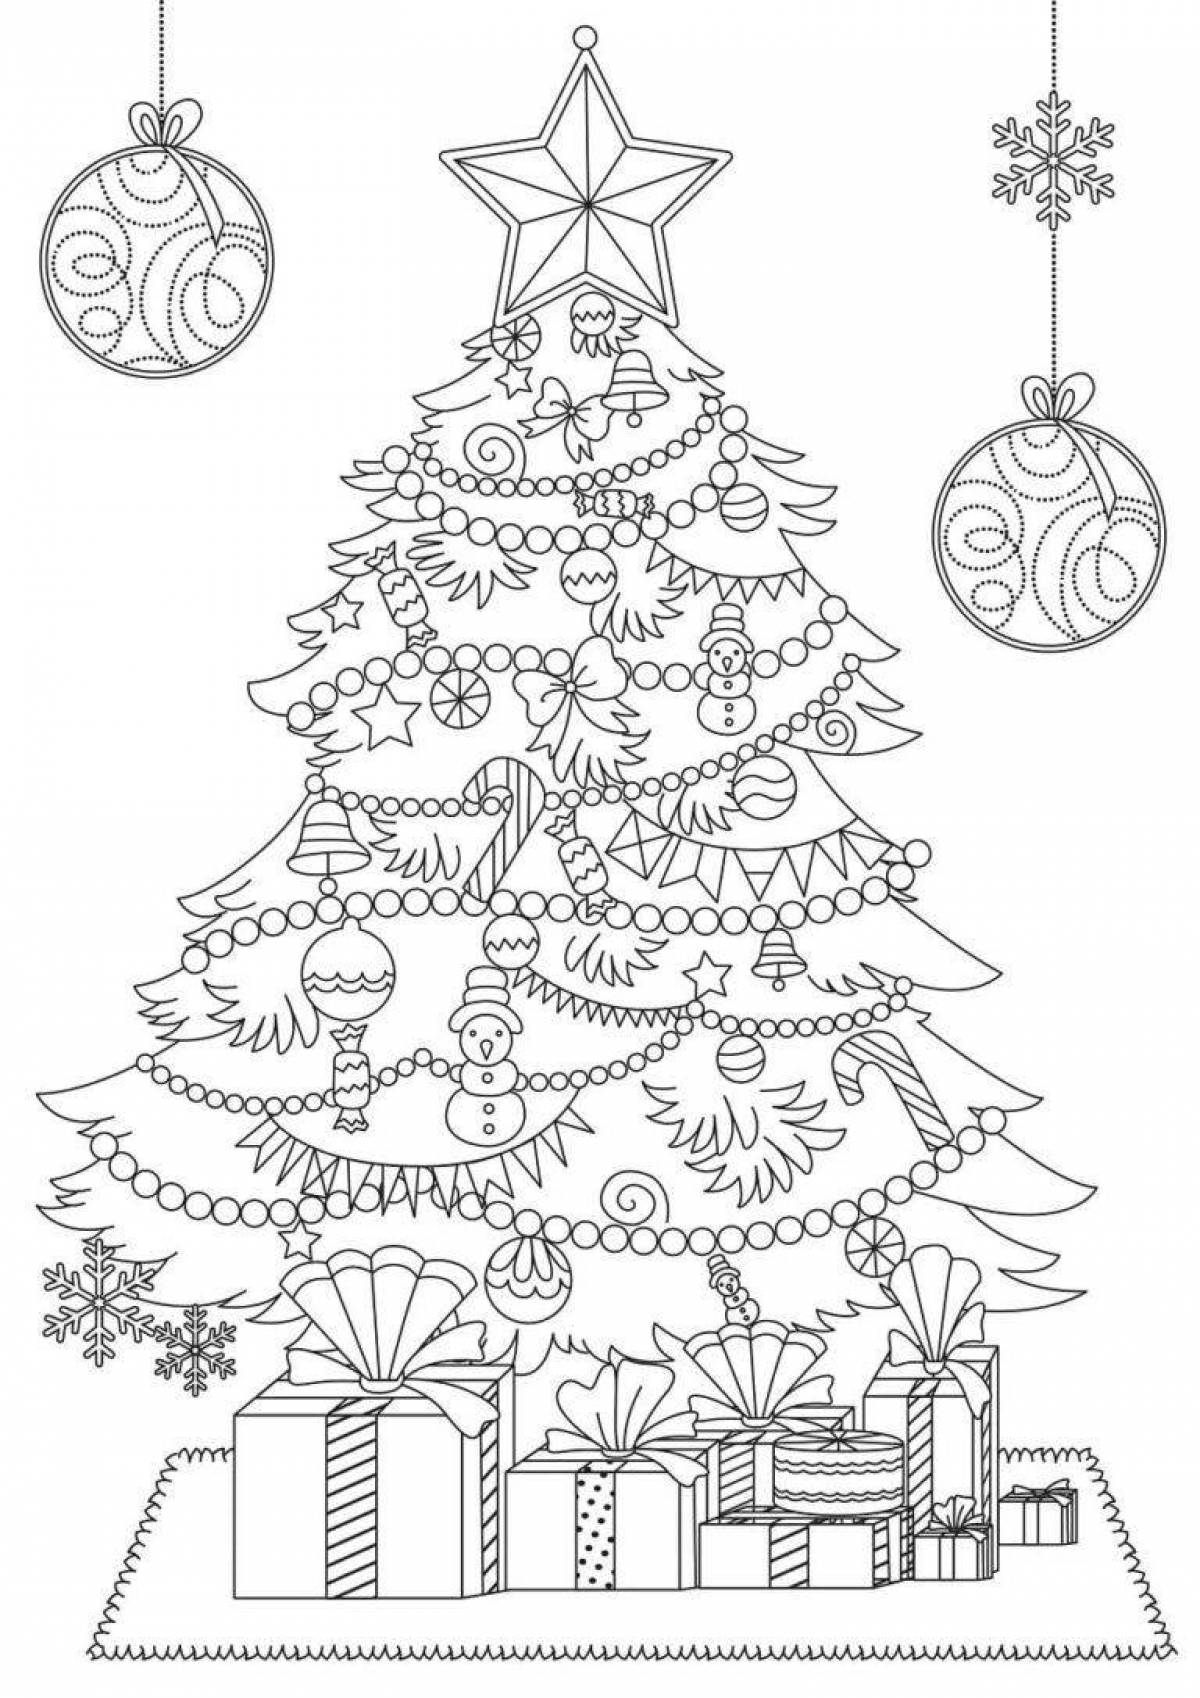 Coloring page of a luxuriously decorated Christmas tree